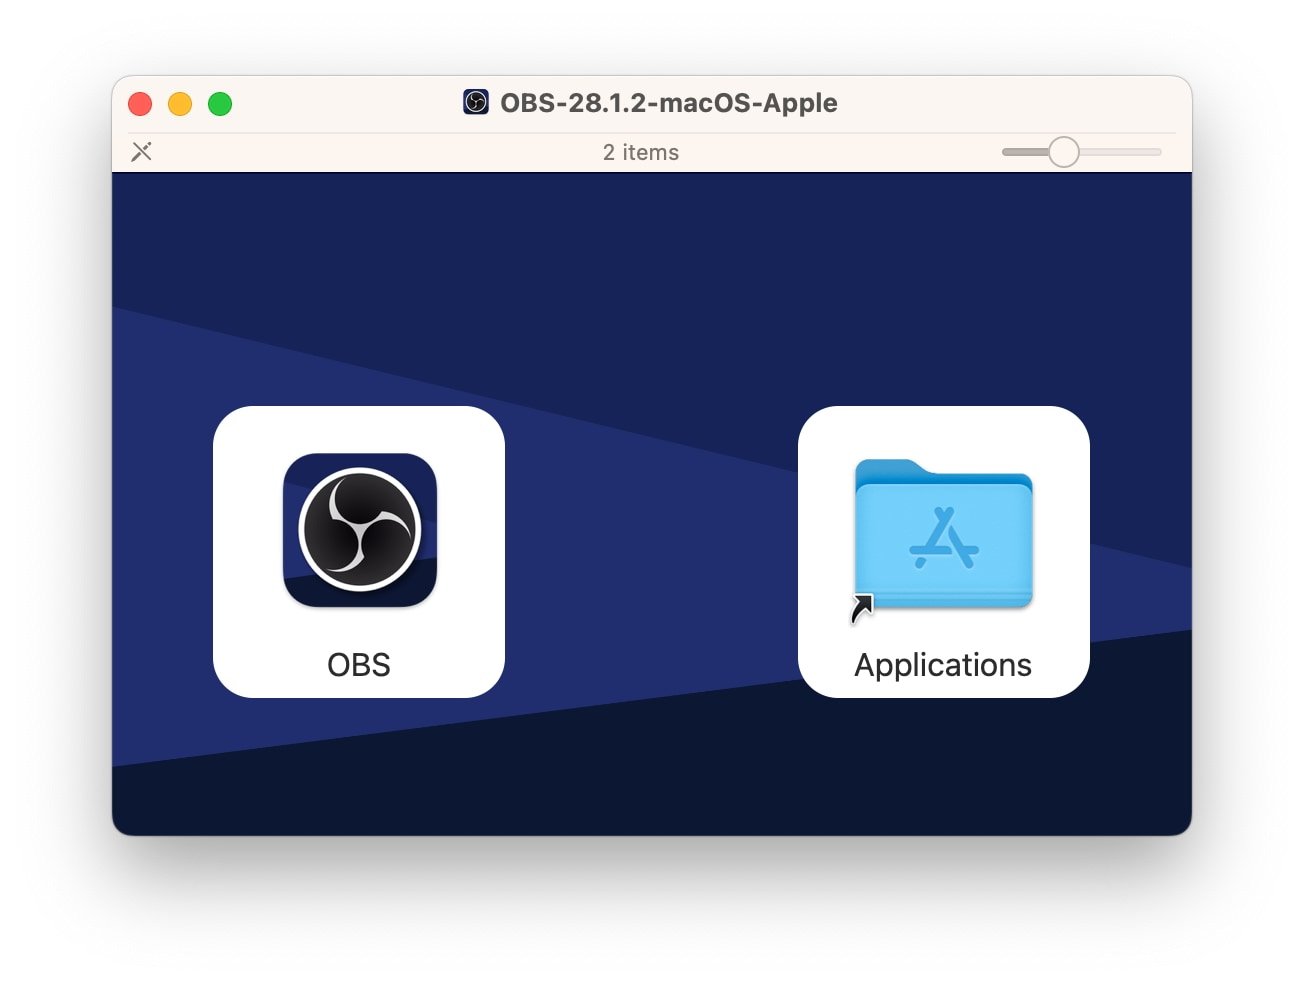 The installer for OBS on macOS